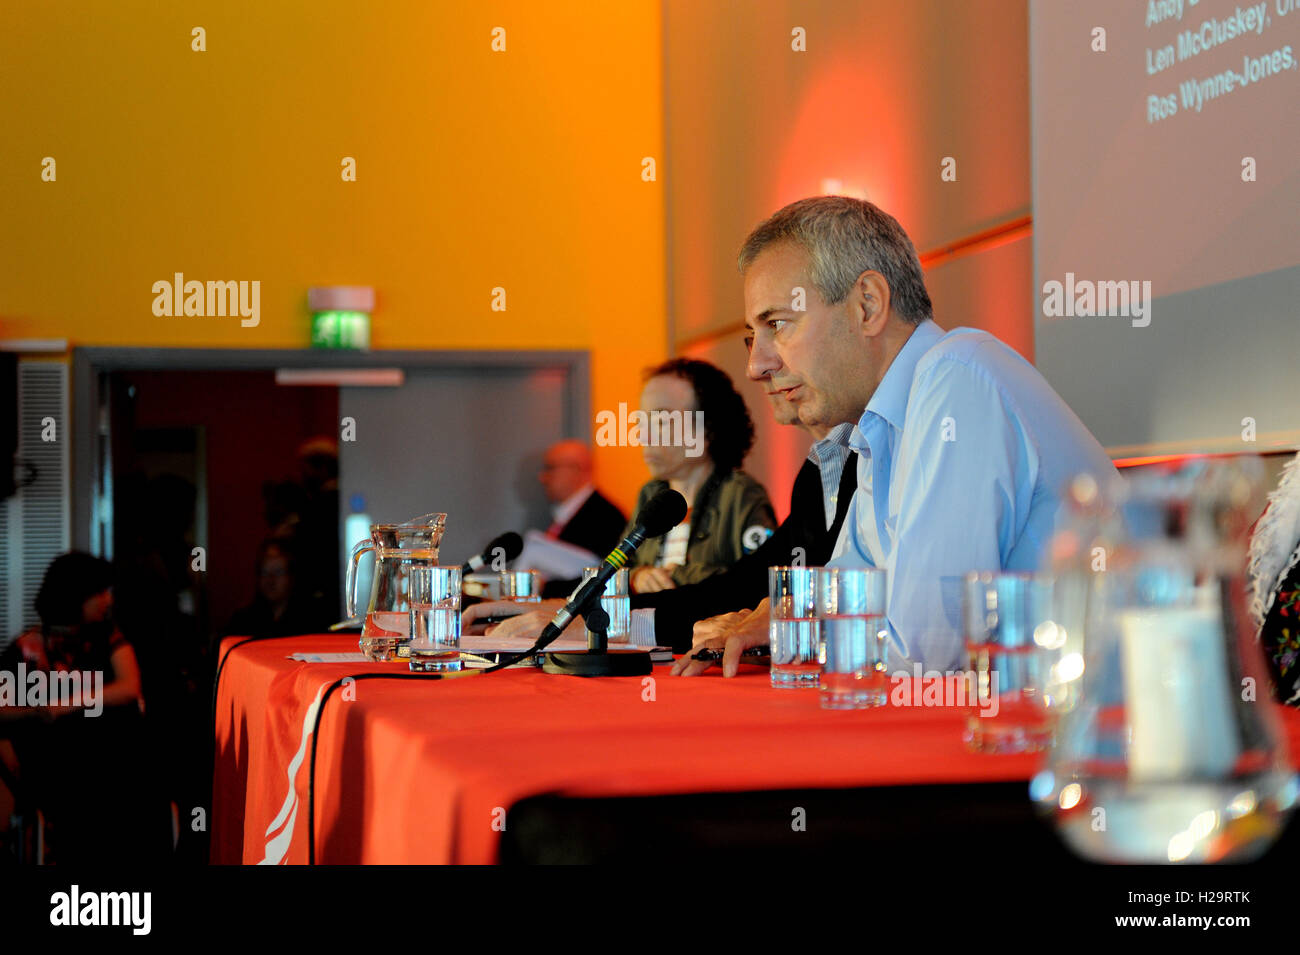 Liverpool, England. 25th September, 2016.  Kevin Maguire, associate editor of the Daily Mirror opens the 'Real Britain' fringe meeting organised by the Daily Mirror newspaper and UNITE the union. The meeting was part of the first day of the Labour Party annual conference at the ACC Conference Centre.  This conference is following Jeremy CorbynÕs re-election as labour party leader after nine weeks of campaigning against fellow candidate, Owen Smith. This is his second leadership victory in just over twelve months and was initiated by the decision of Angela Eagle to stand against him. Kevin Haye Stock Photo